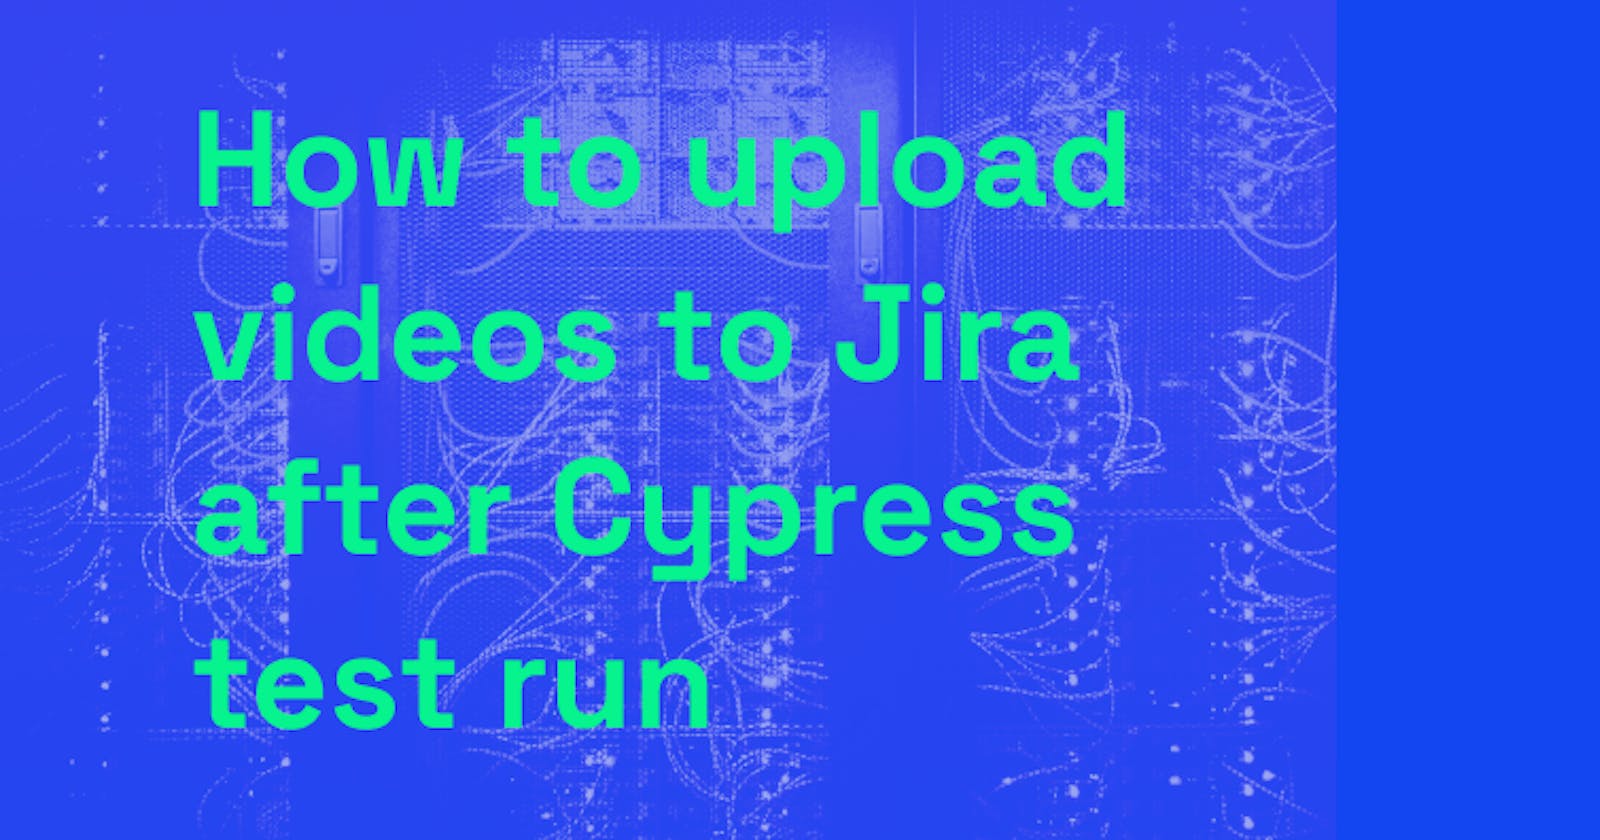 How to upload videos to Jira after Cypress test run